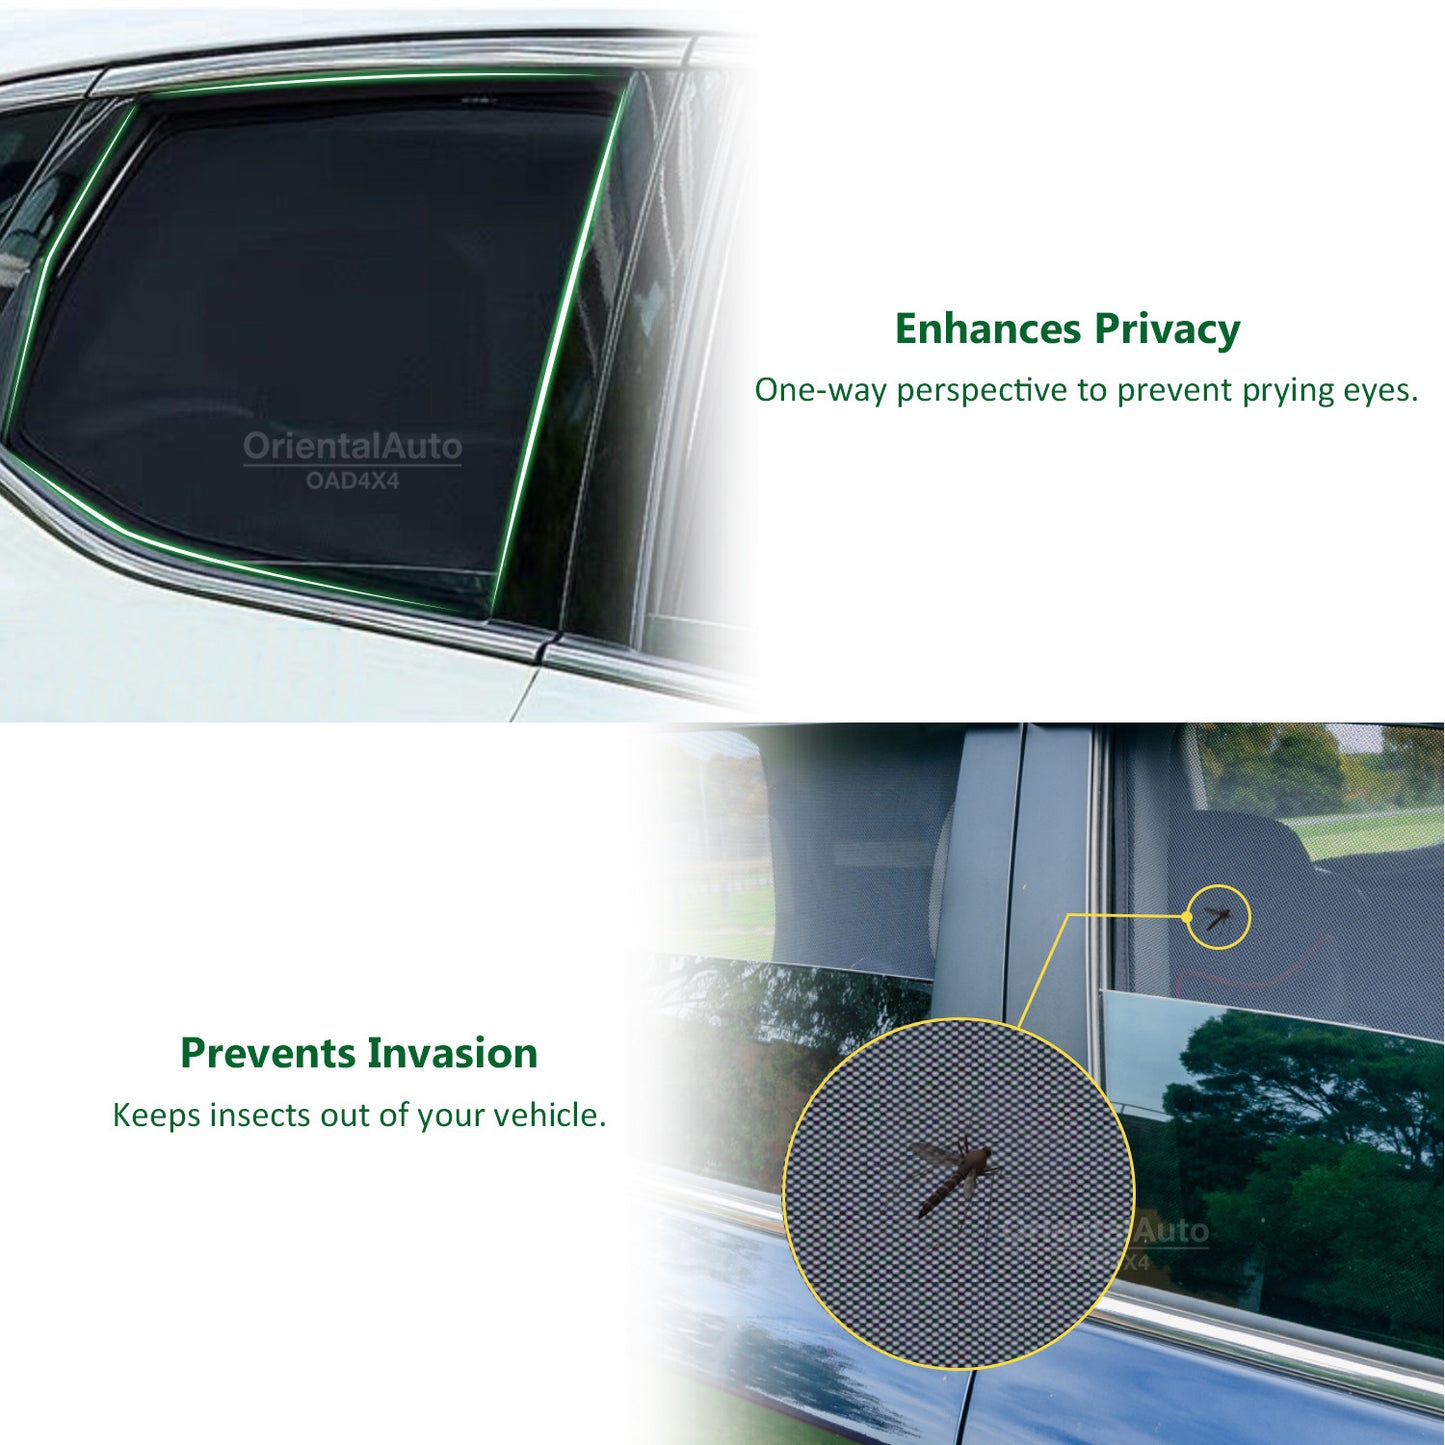 4PCS Magnetic Sun Shade for Mercedes-Benz X-Class 2017-Onwards Window Sun Shades UV Protection Mesh Cover